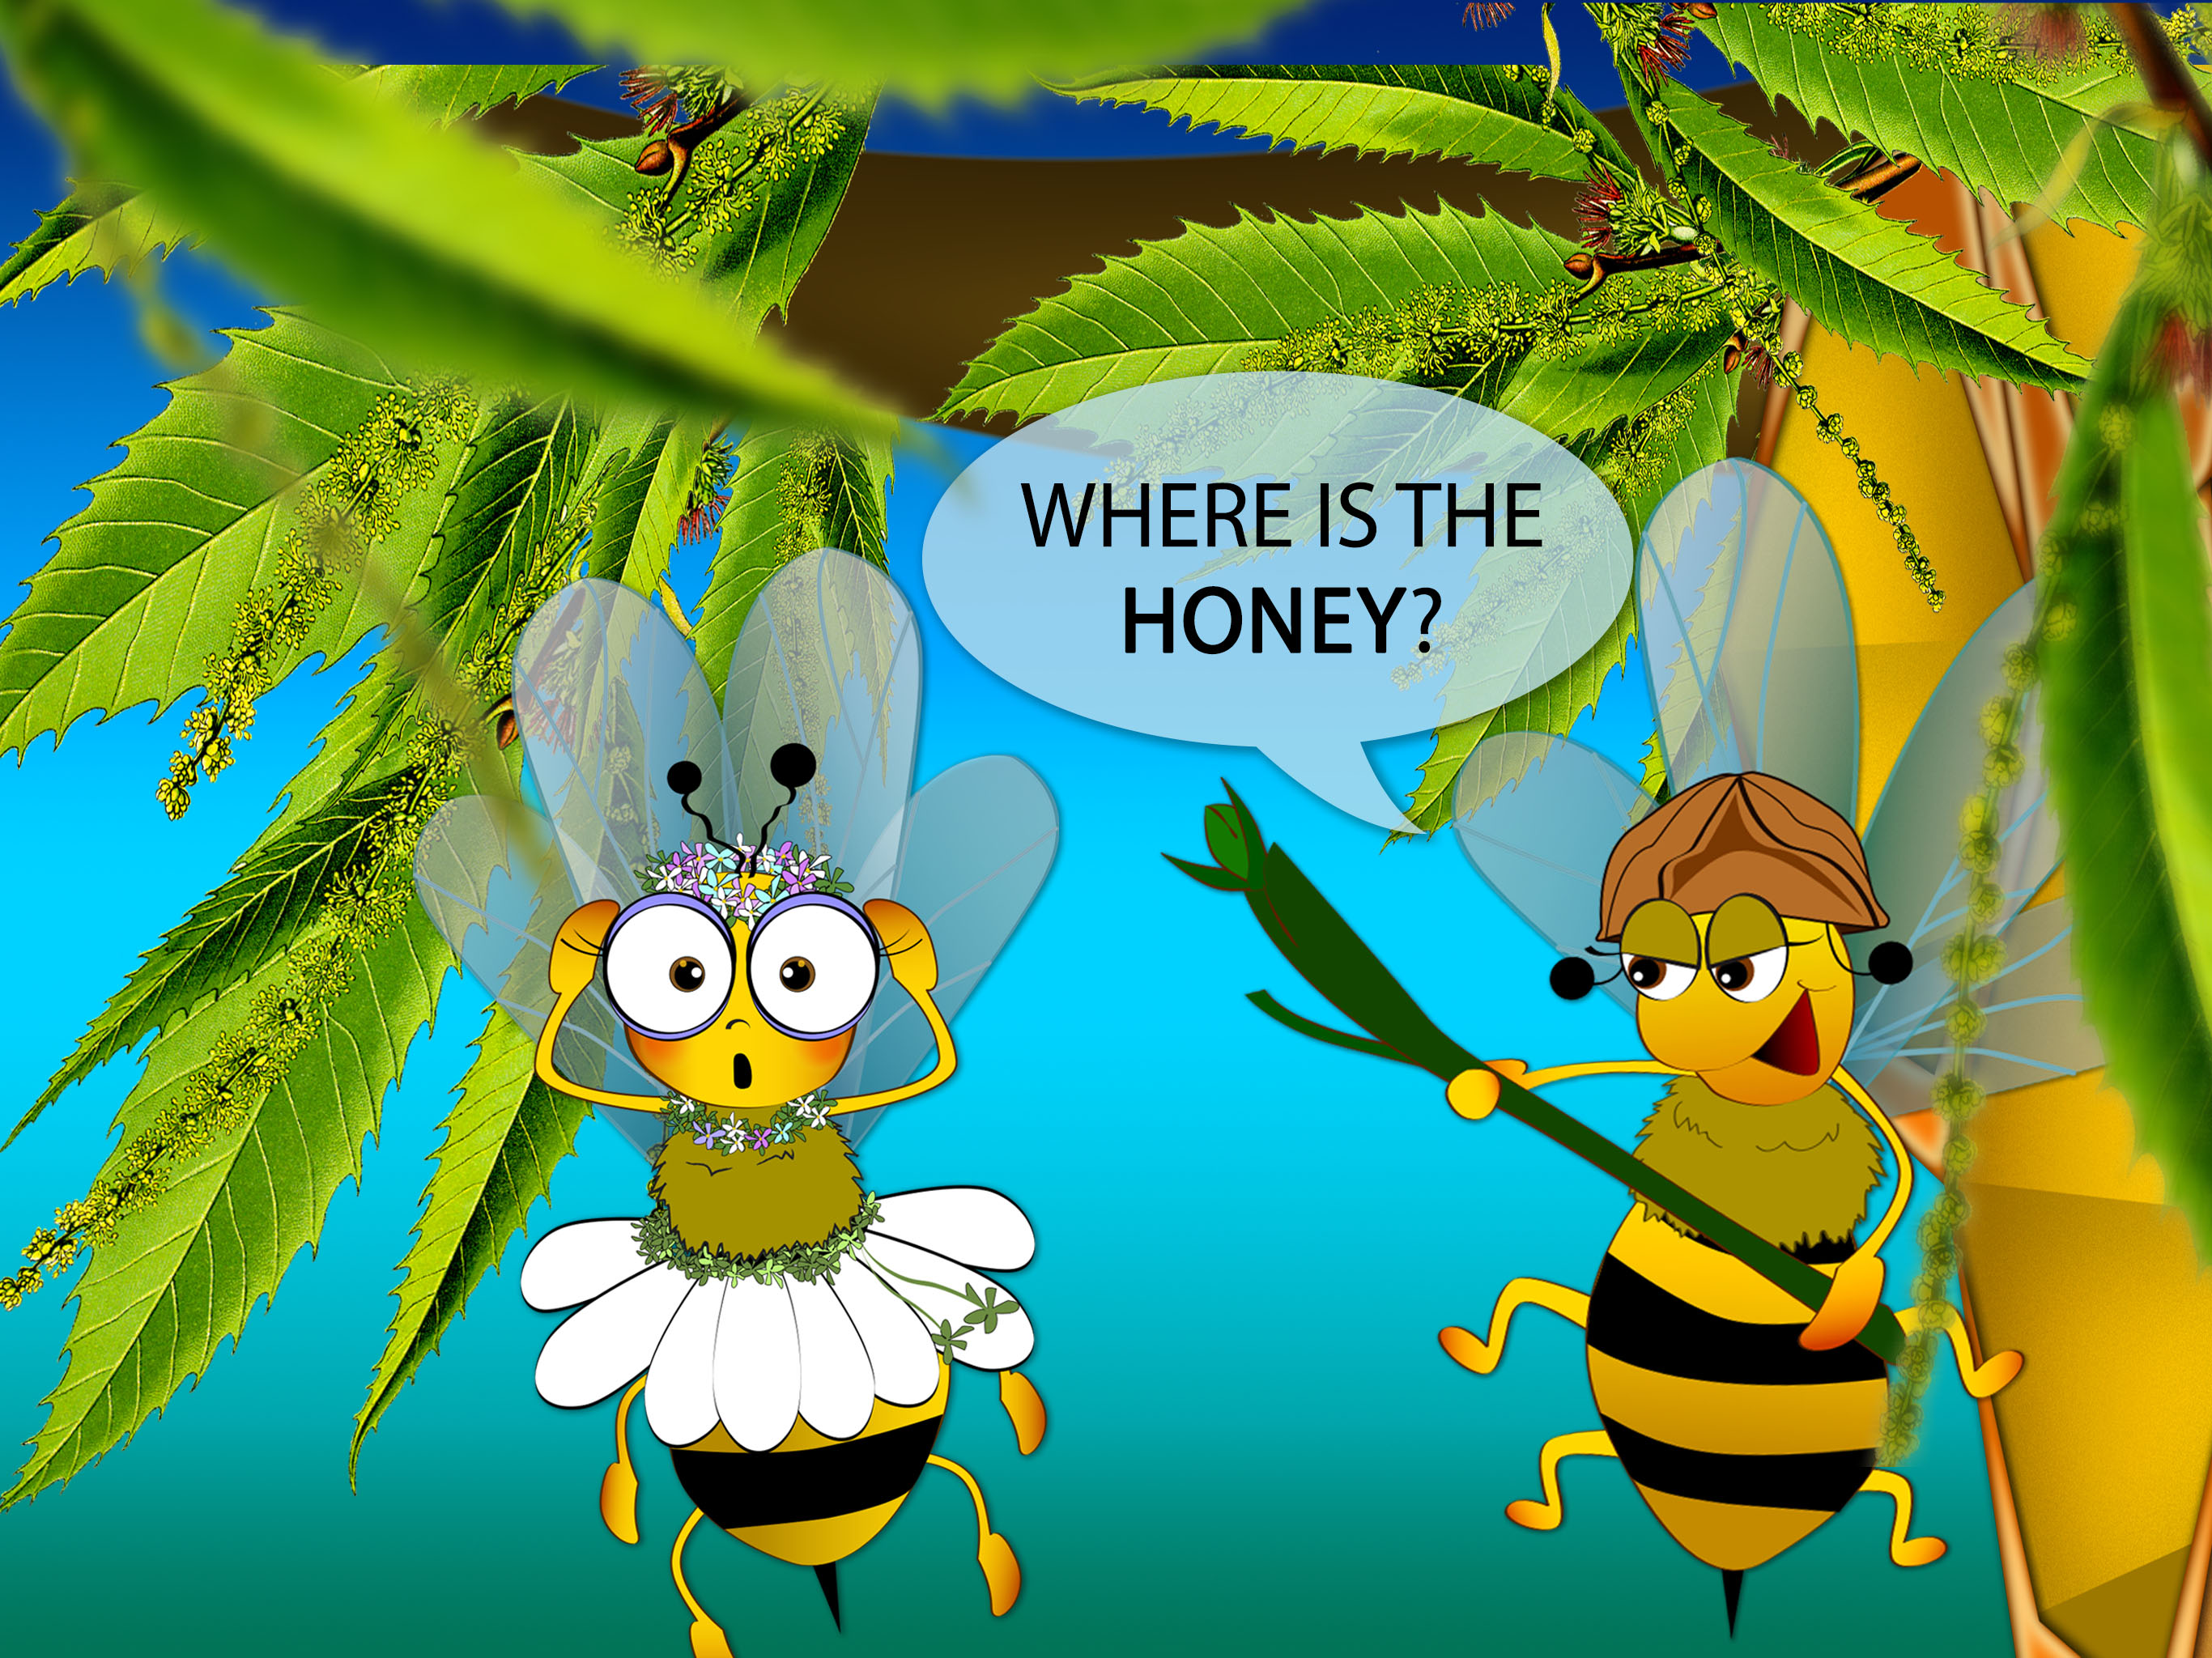 Honey Tina and Bees - Where is the honey